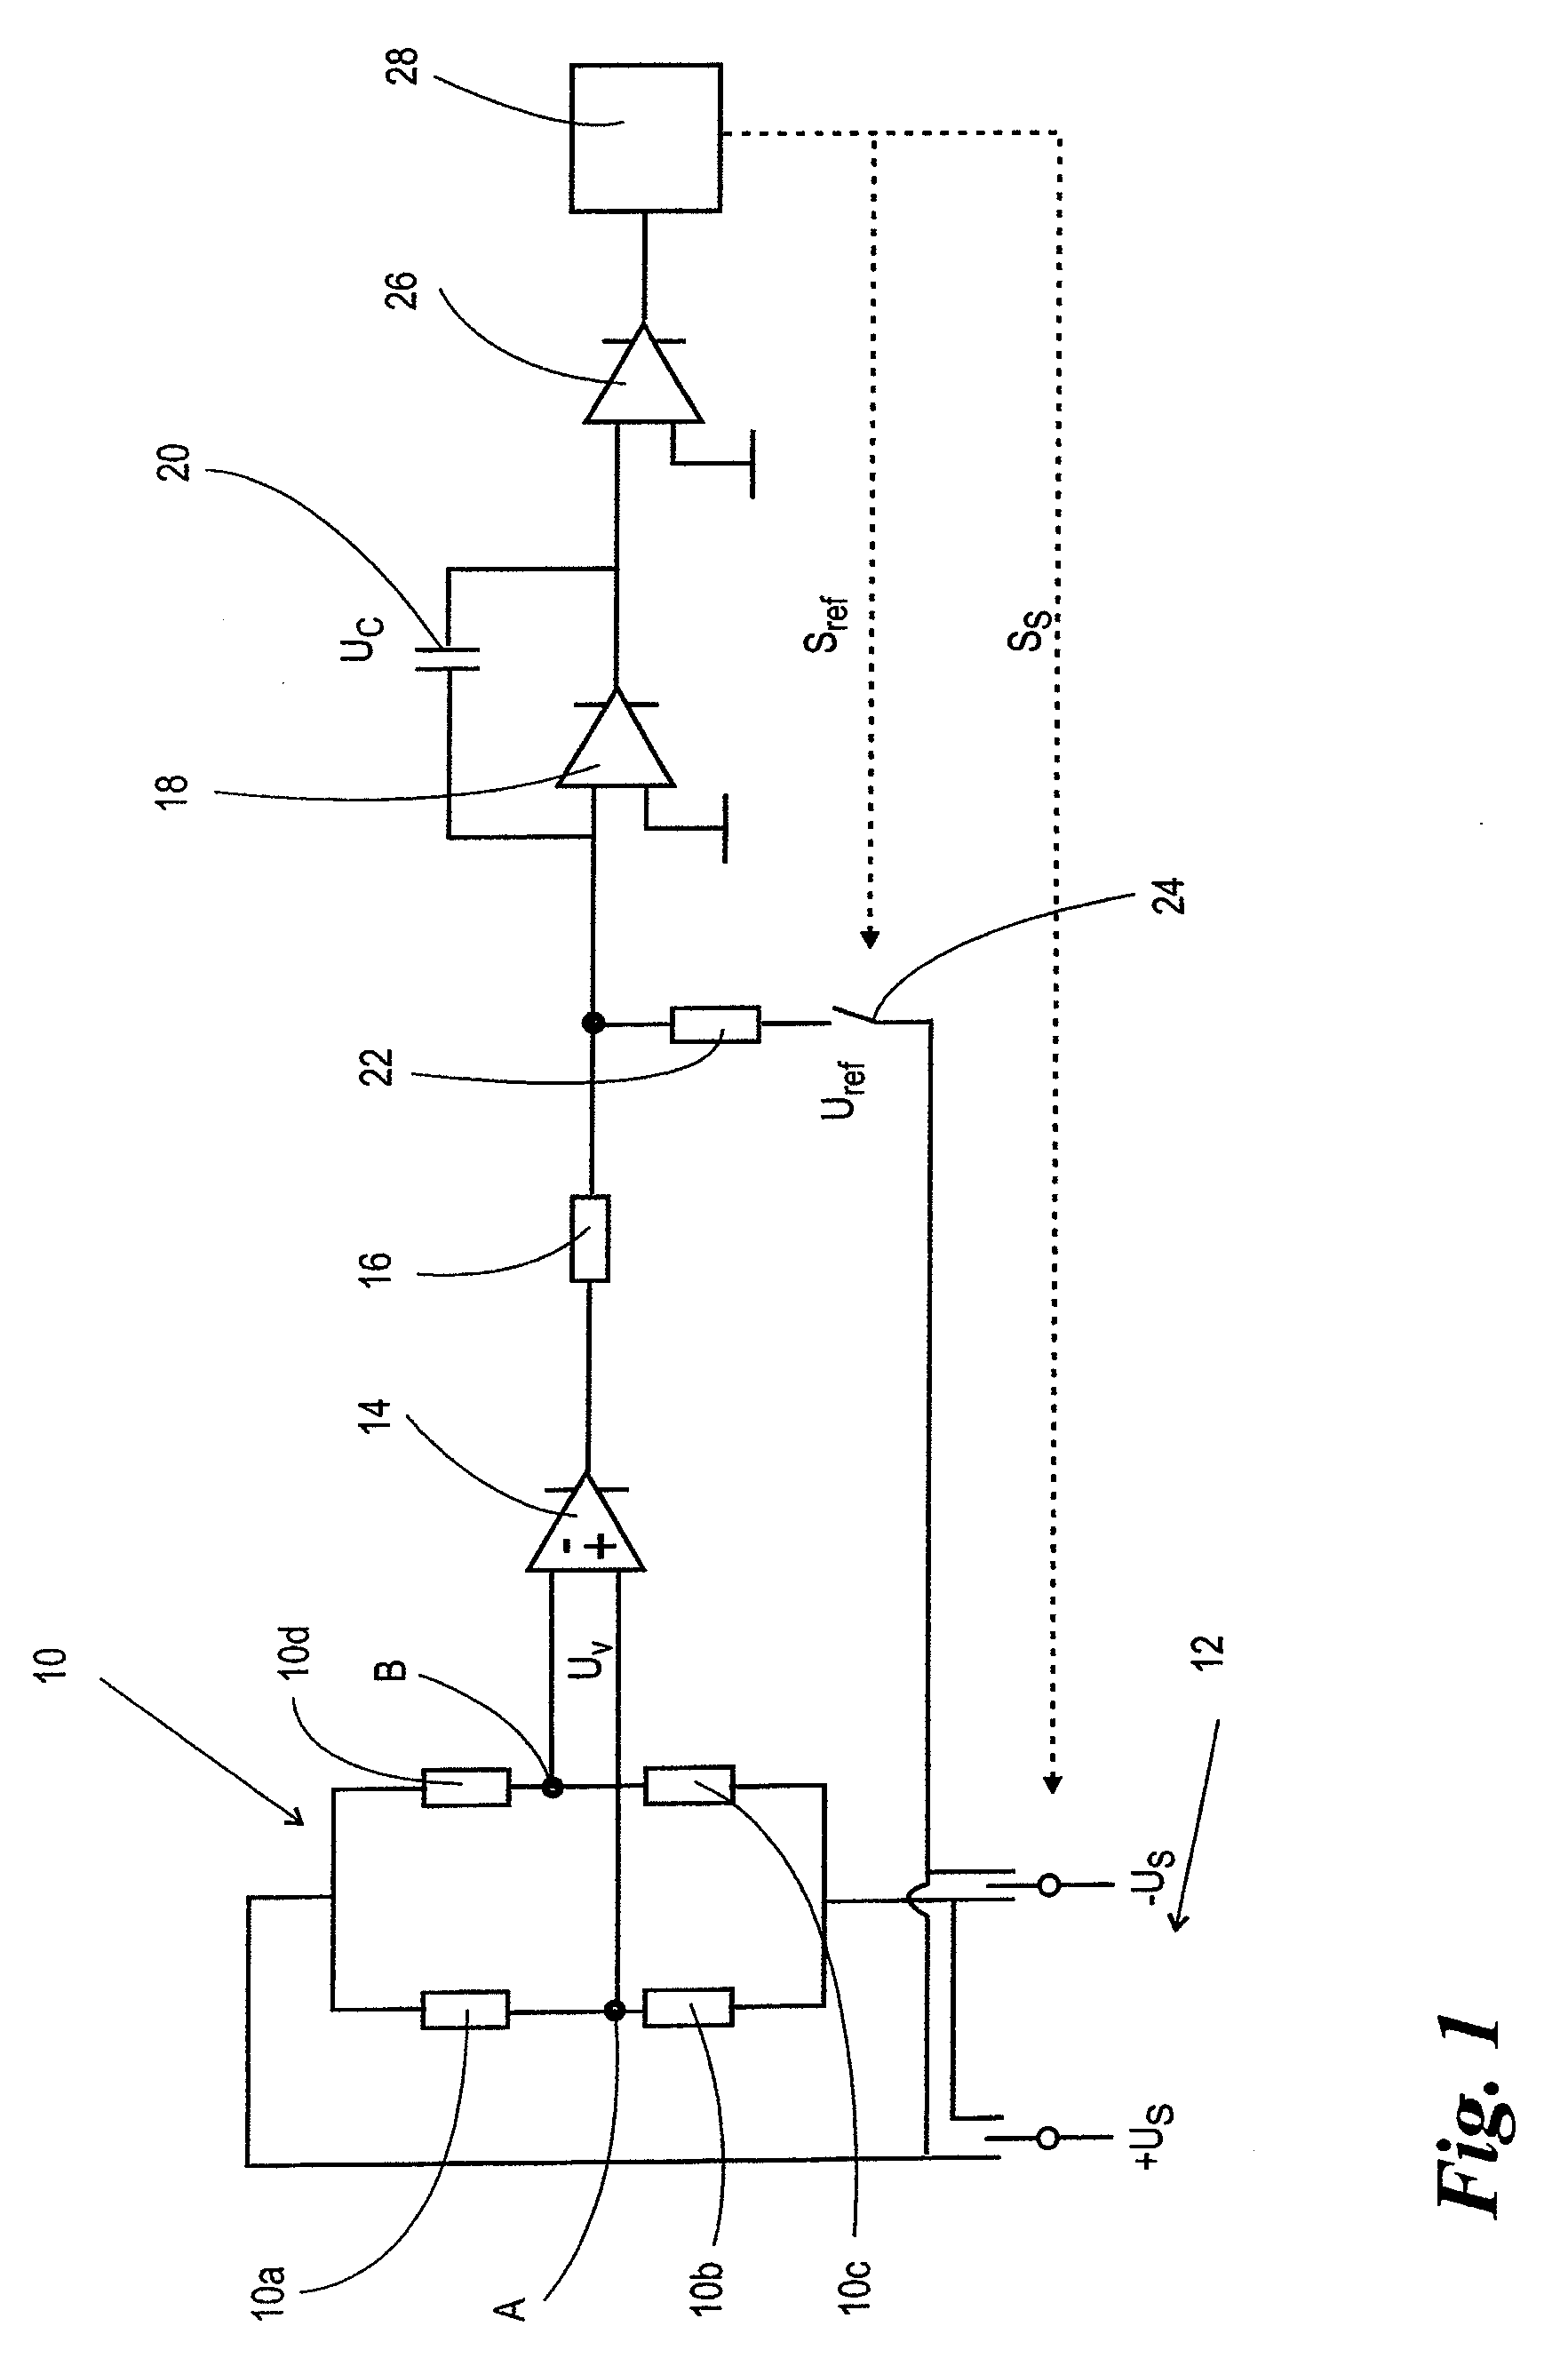 Measurement amplification device and method